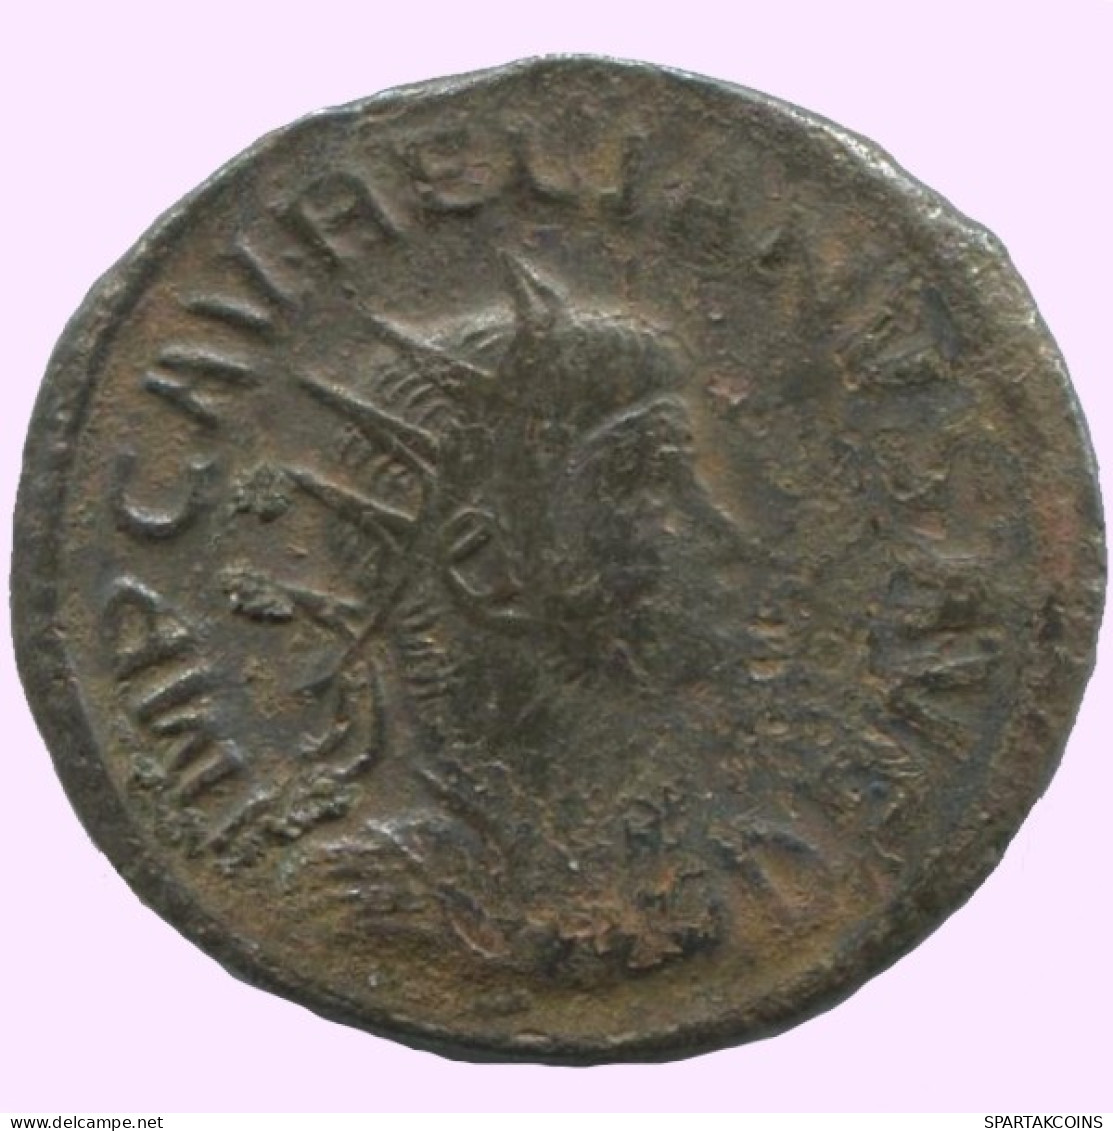 AURELIAN ANTONINIANUS Antioch (A) AD 274-275 RESTITVTOR BIS #ANT1935.48.F.A - The Military Crisis (235 AD To 284 AD)